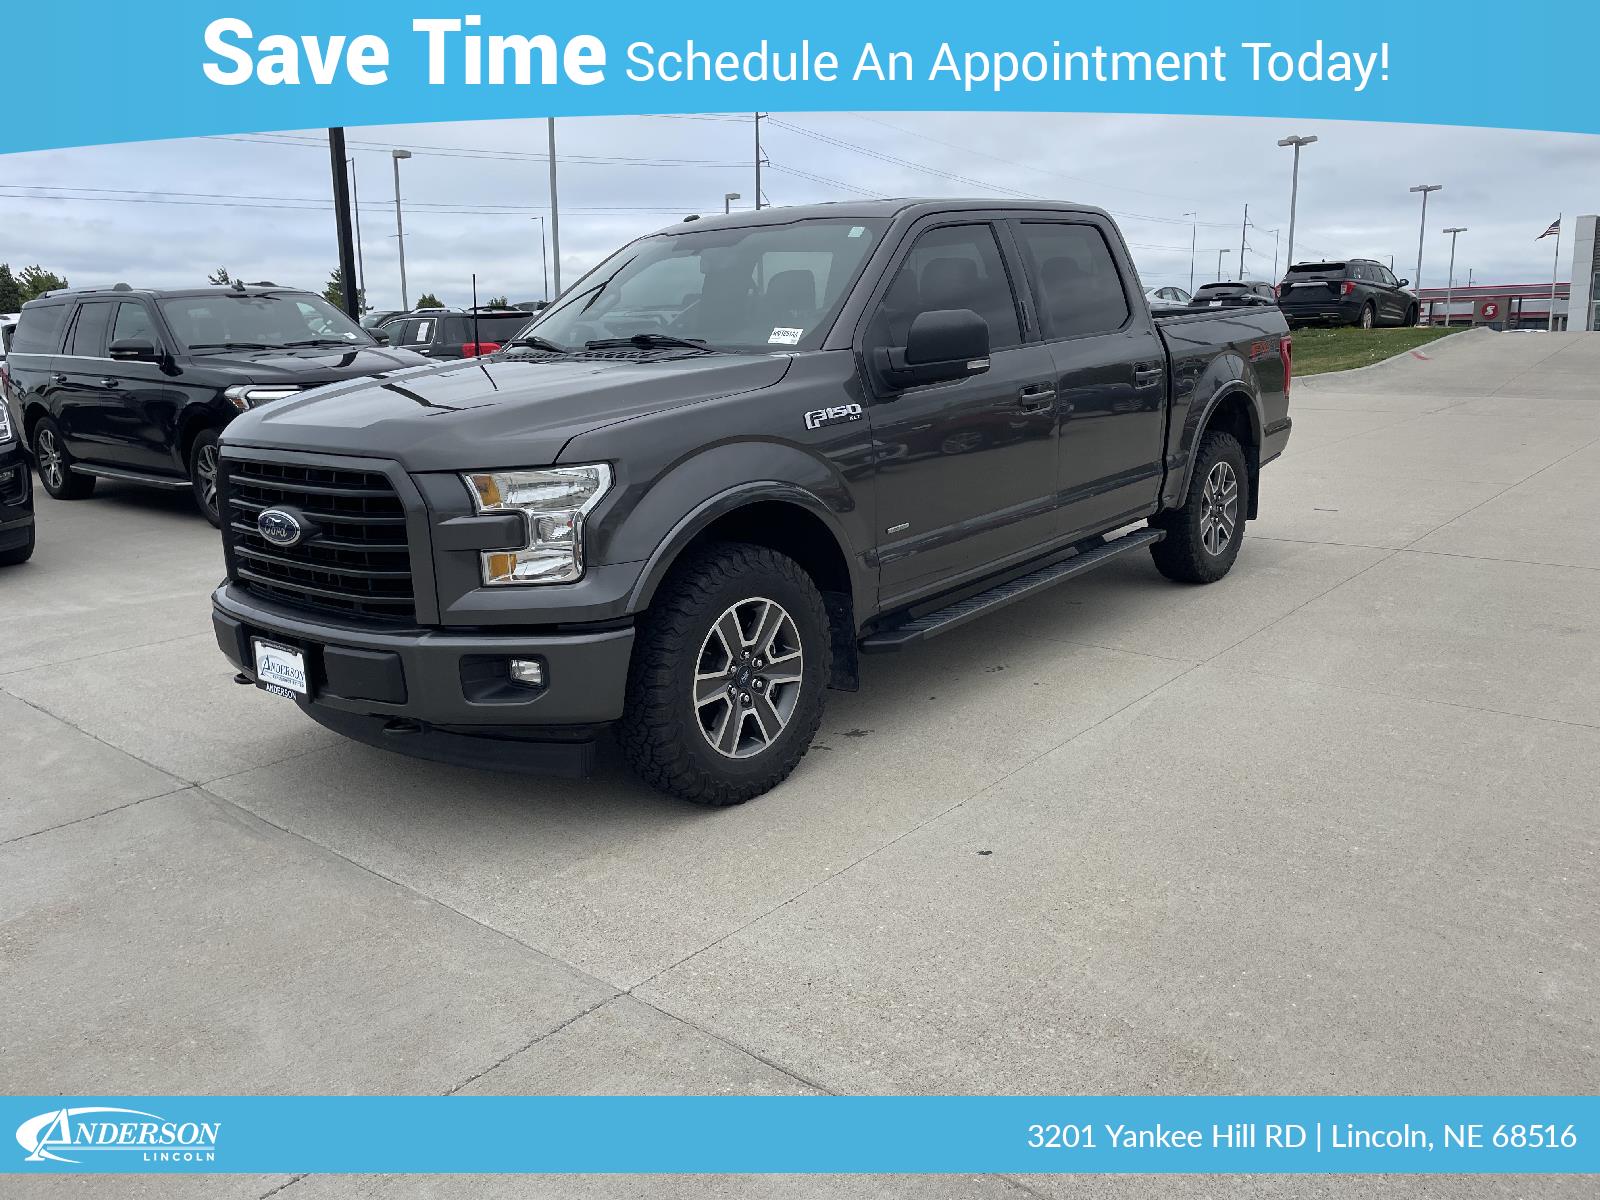 Used 2017 Ford F-150 XLT Stock: 4001851AA